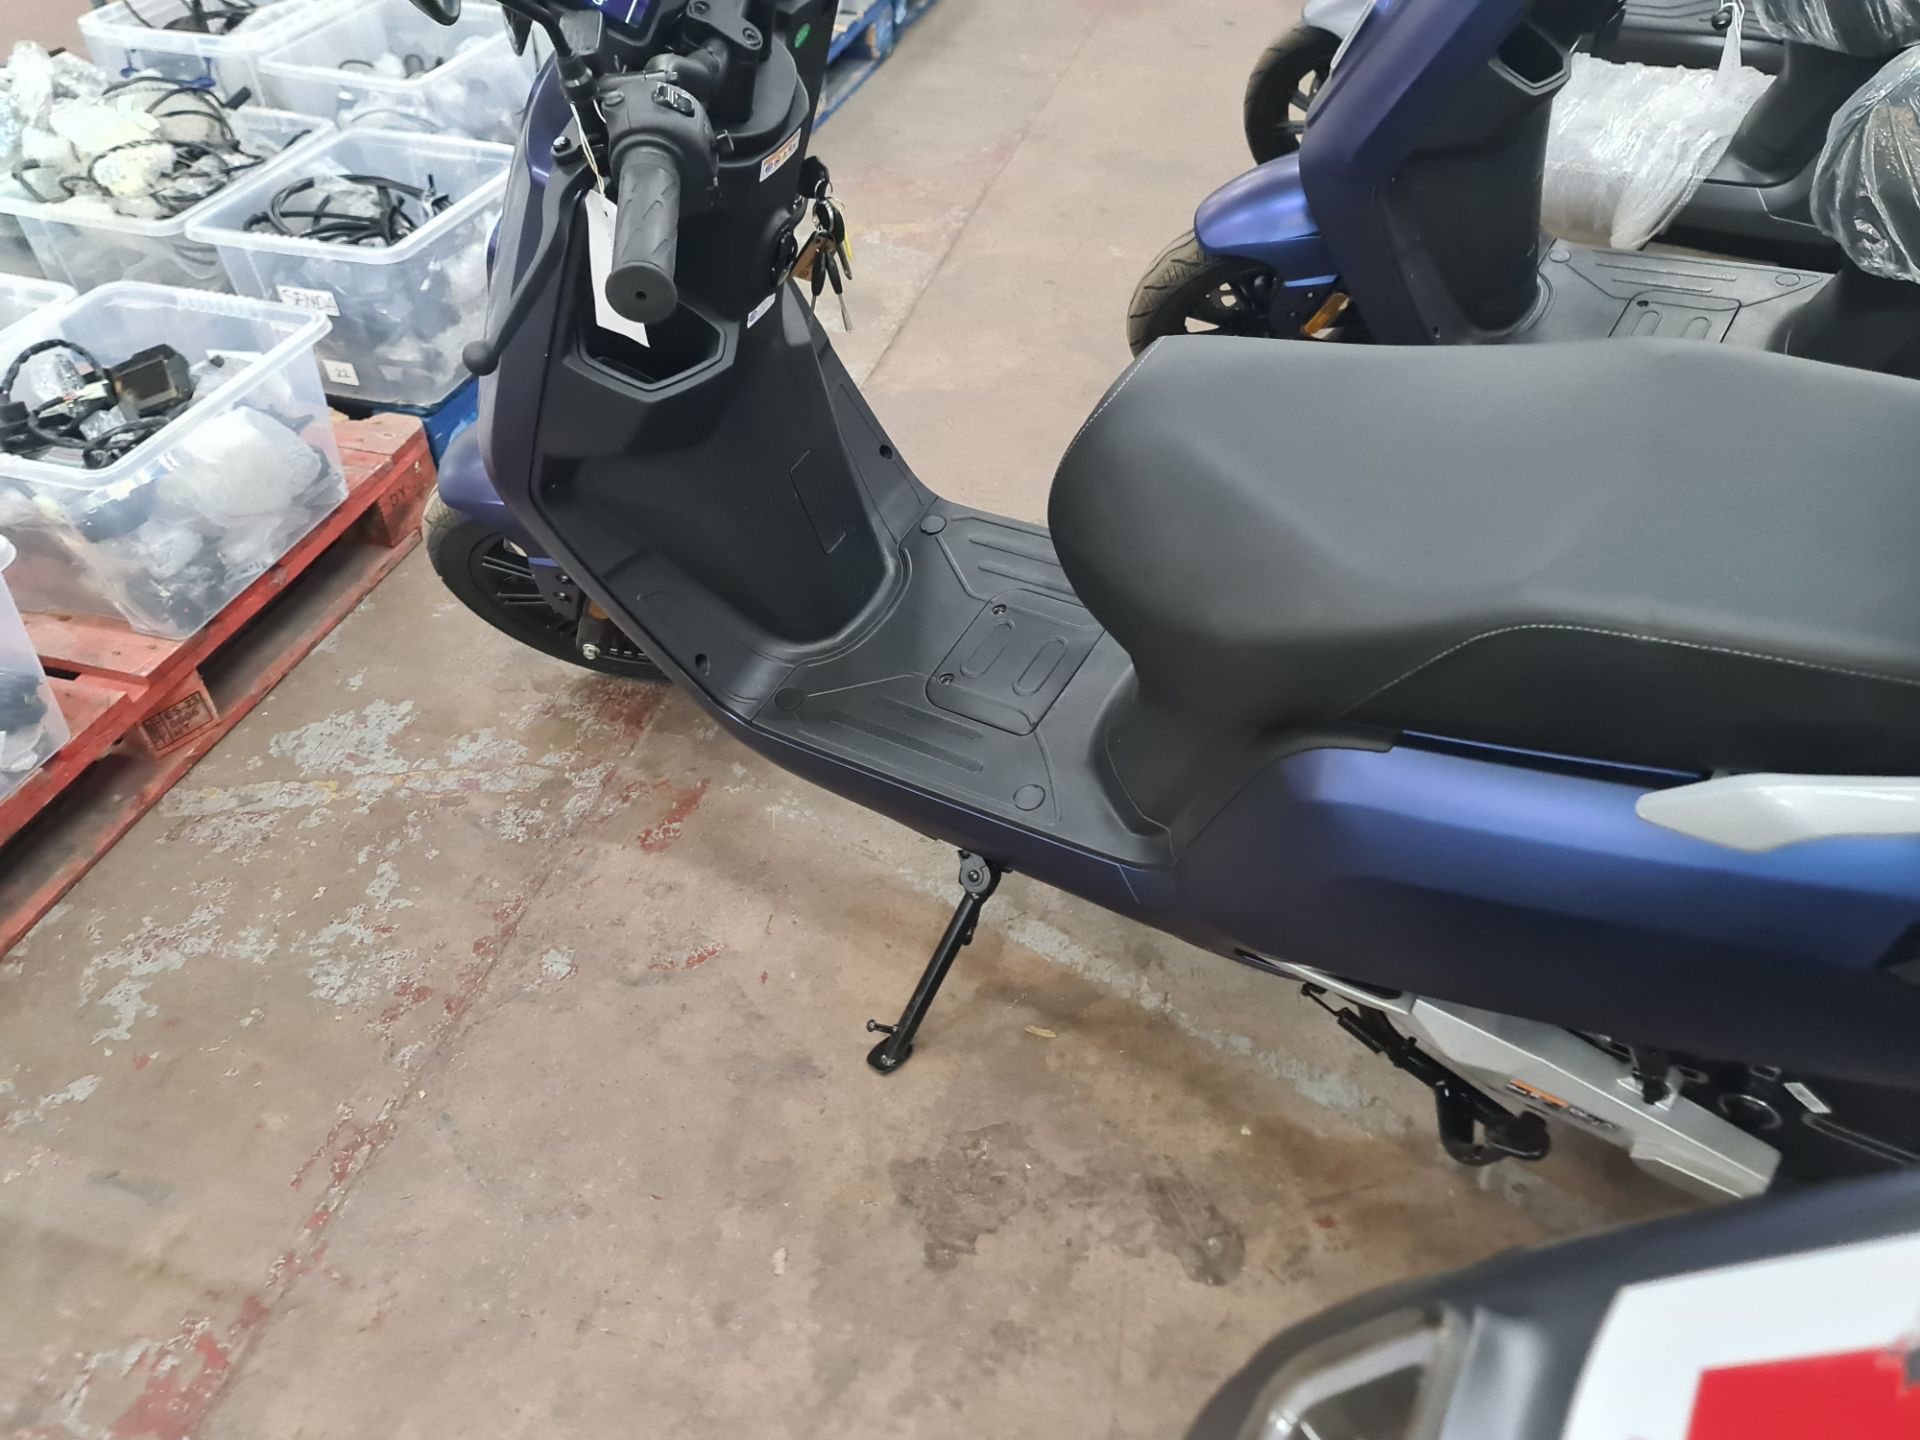 Senda 3000 dual battery electric moped, colour: blue, 50cc equivalent, 30mph top speed, 90 mile rang - Image 15 of 21